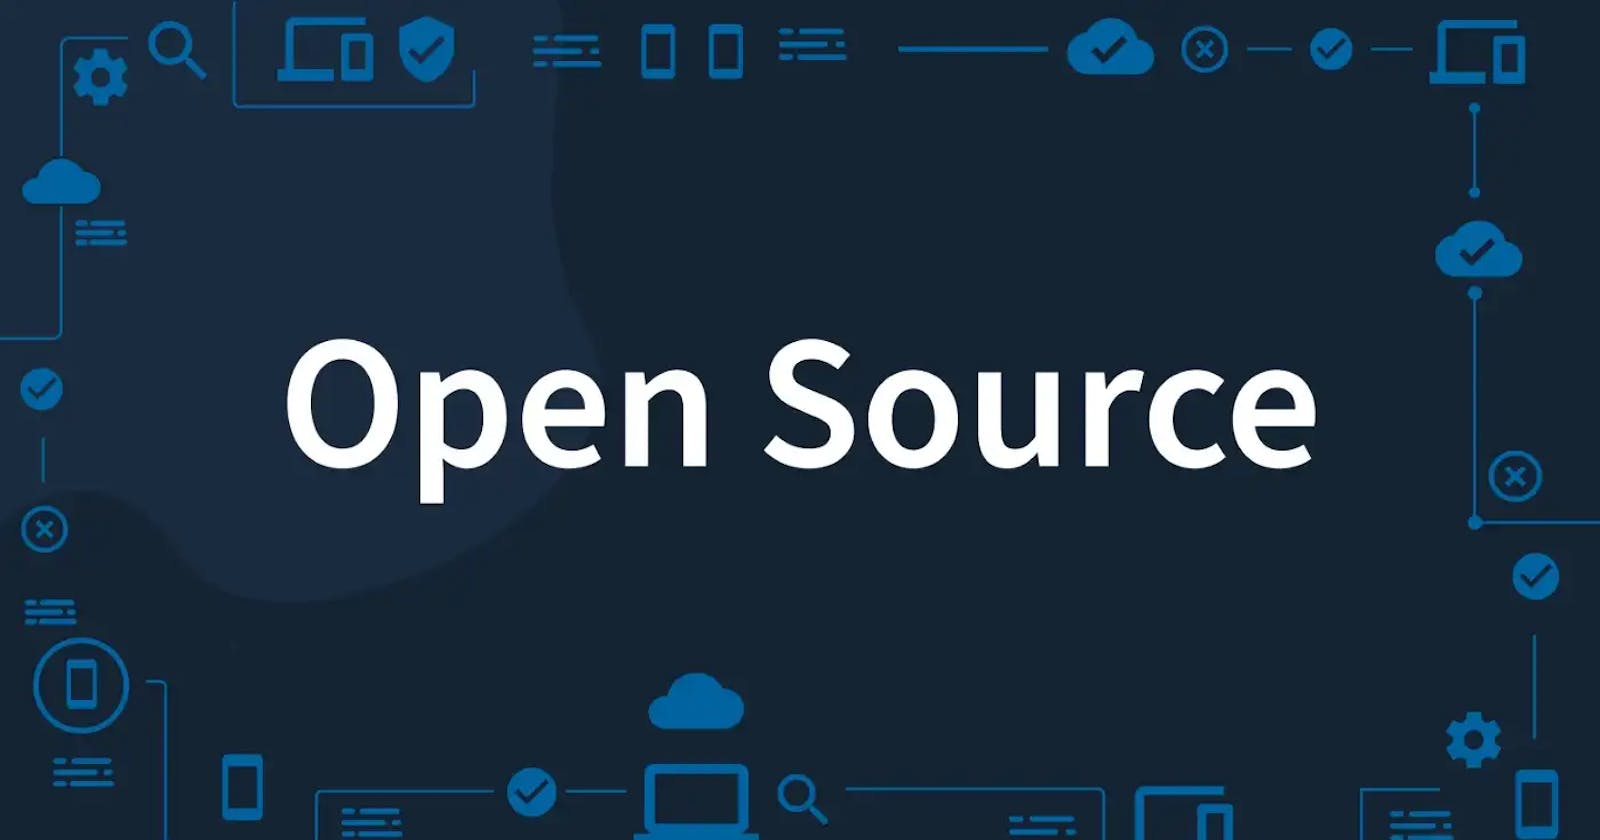 Non-coding open source contributions.
All about non-coding open source contributions, how valuable are they?